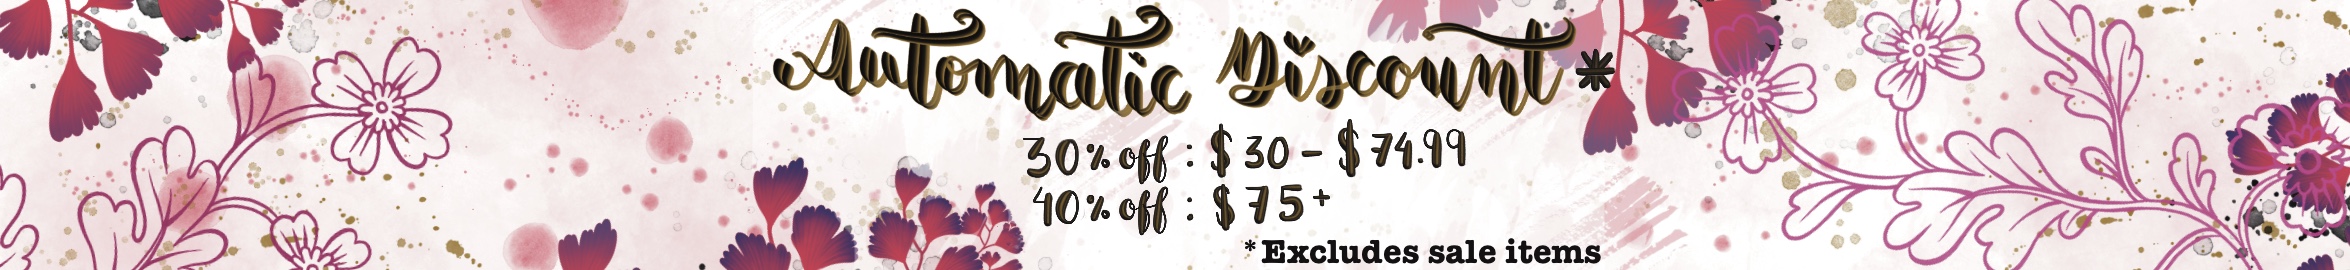 Discount Svg free download